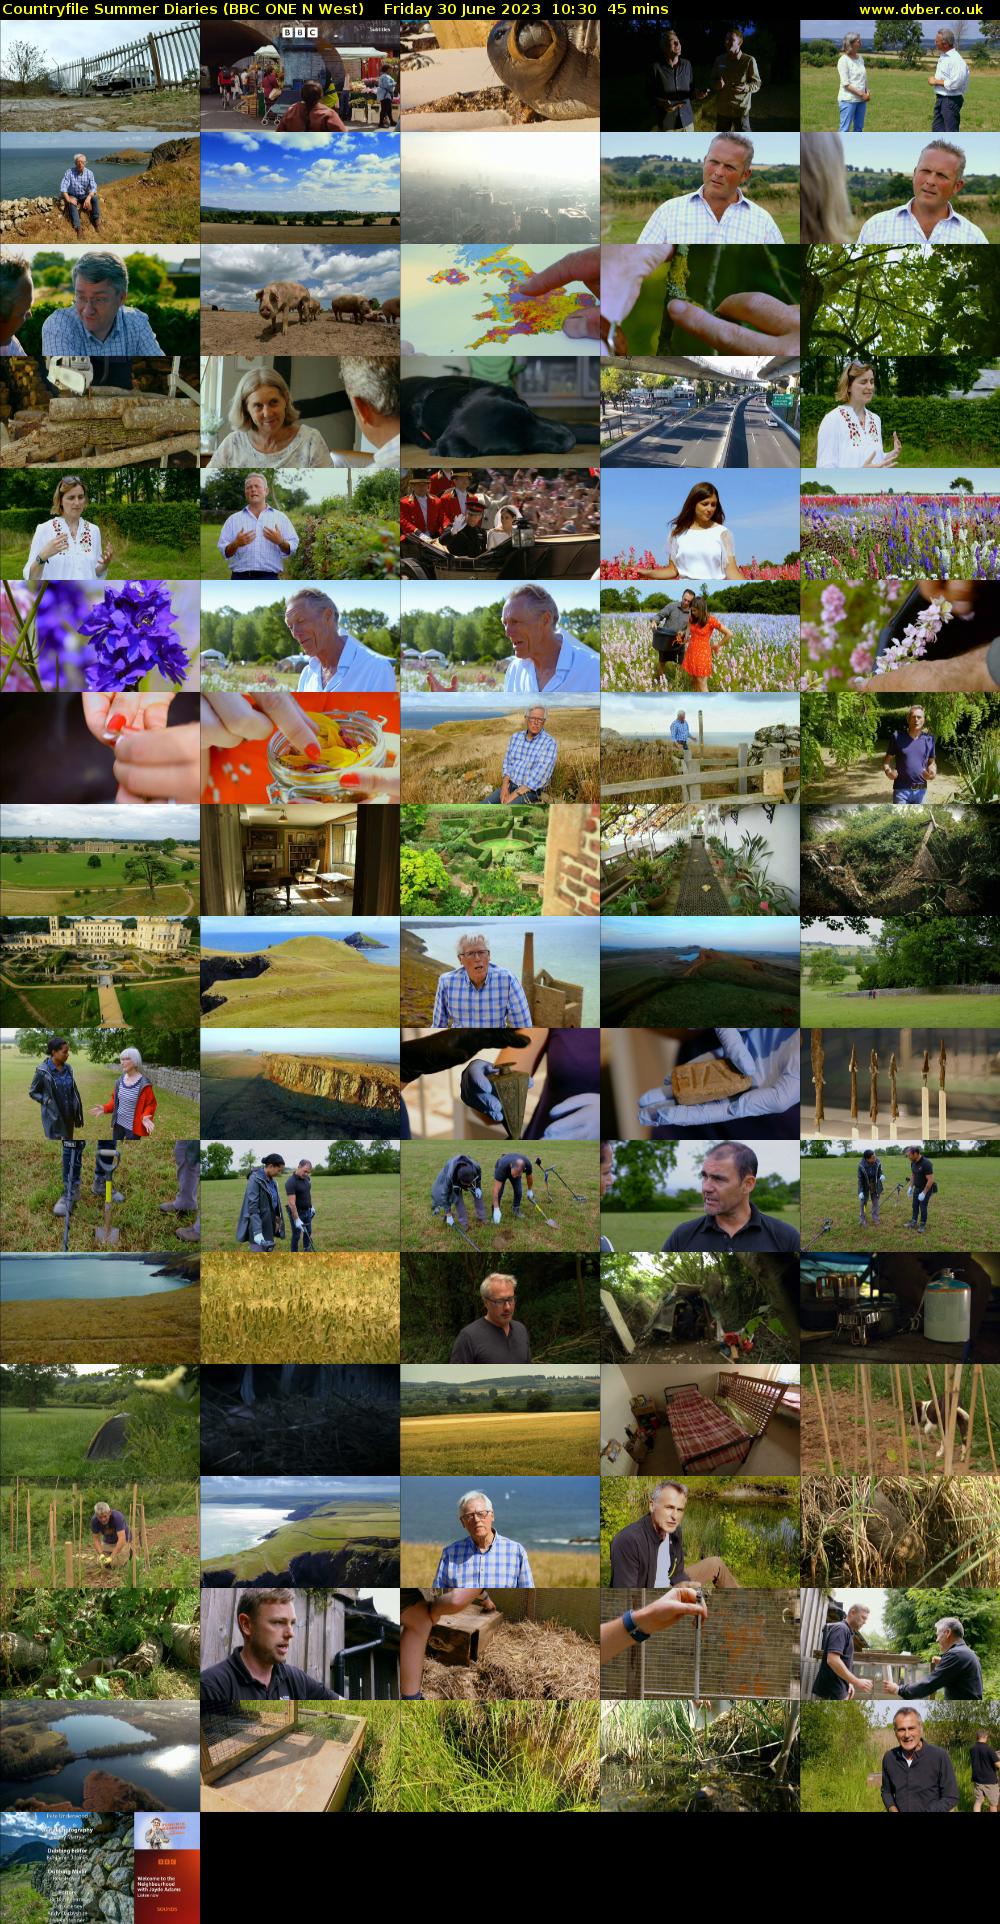 Countryfile Summer Diaries (BBC ONE N West) Friday 30 June 2023 10:30 - 11:15